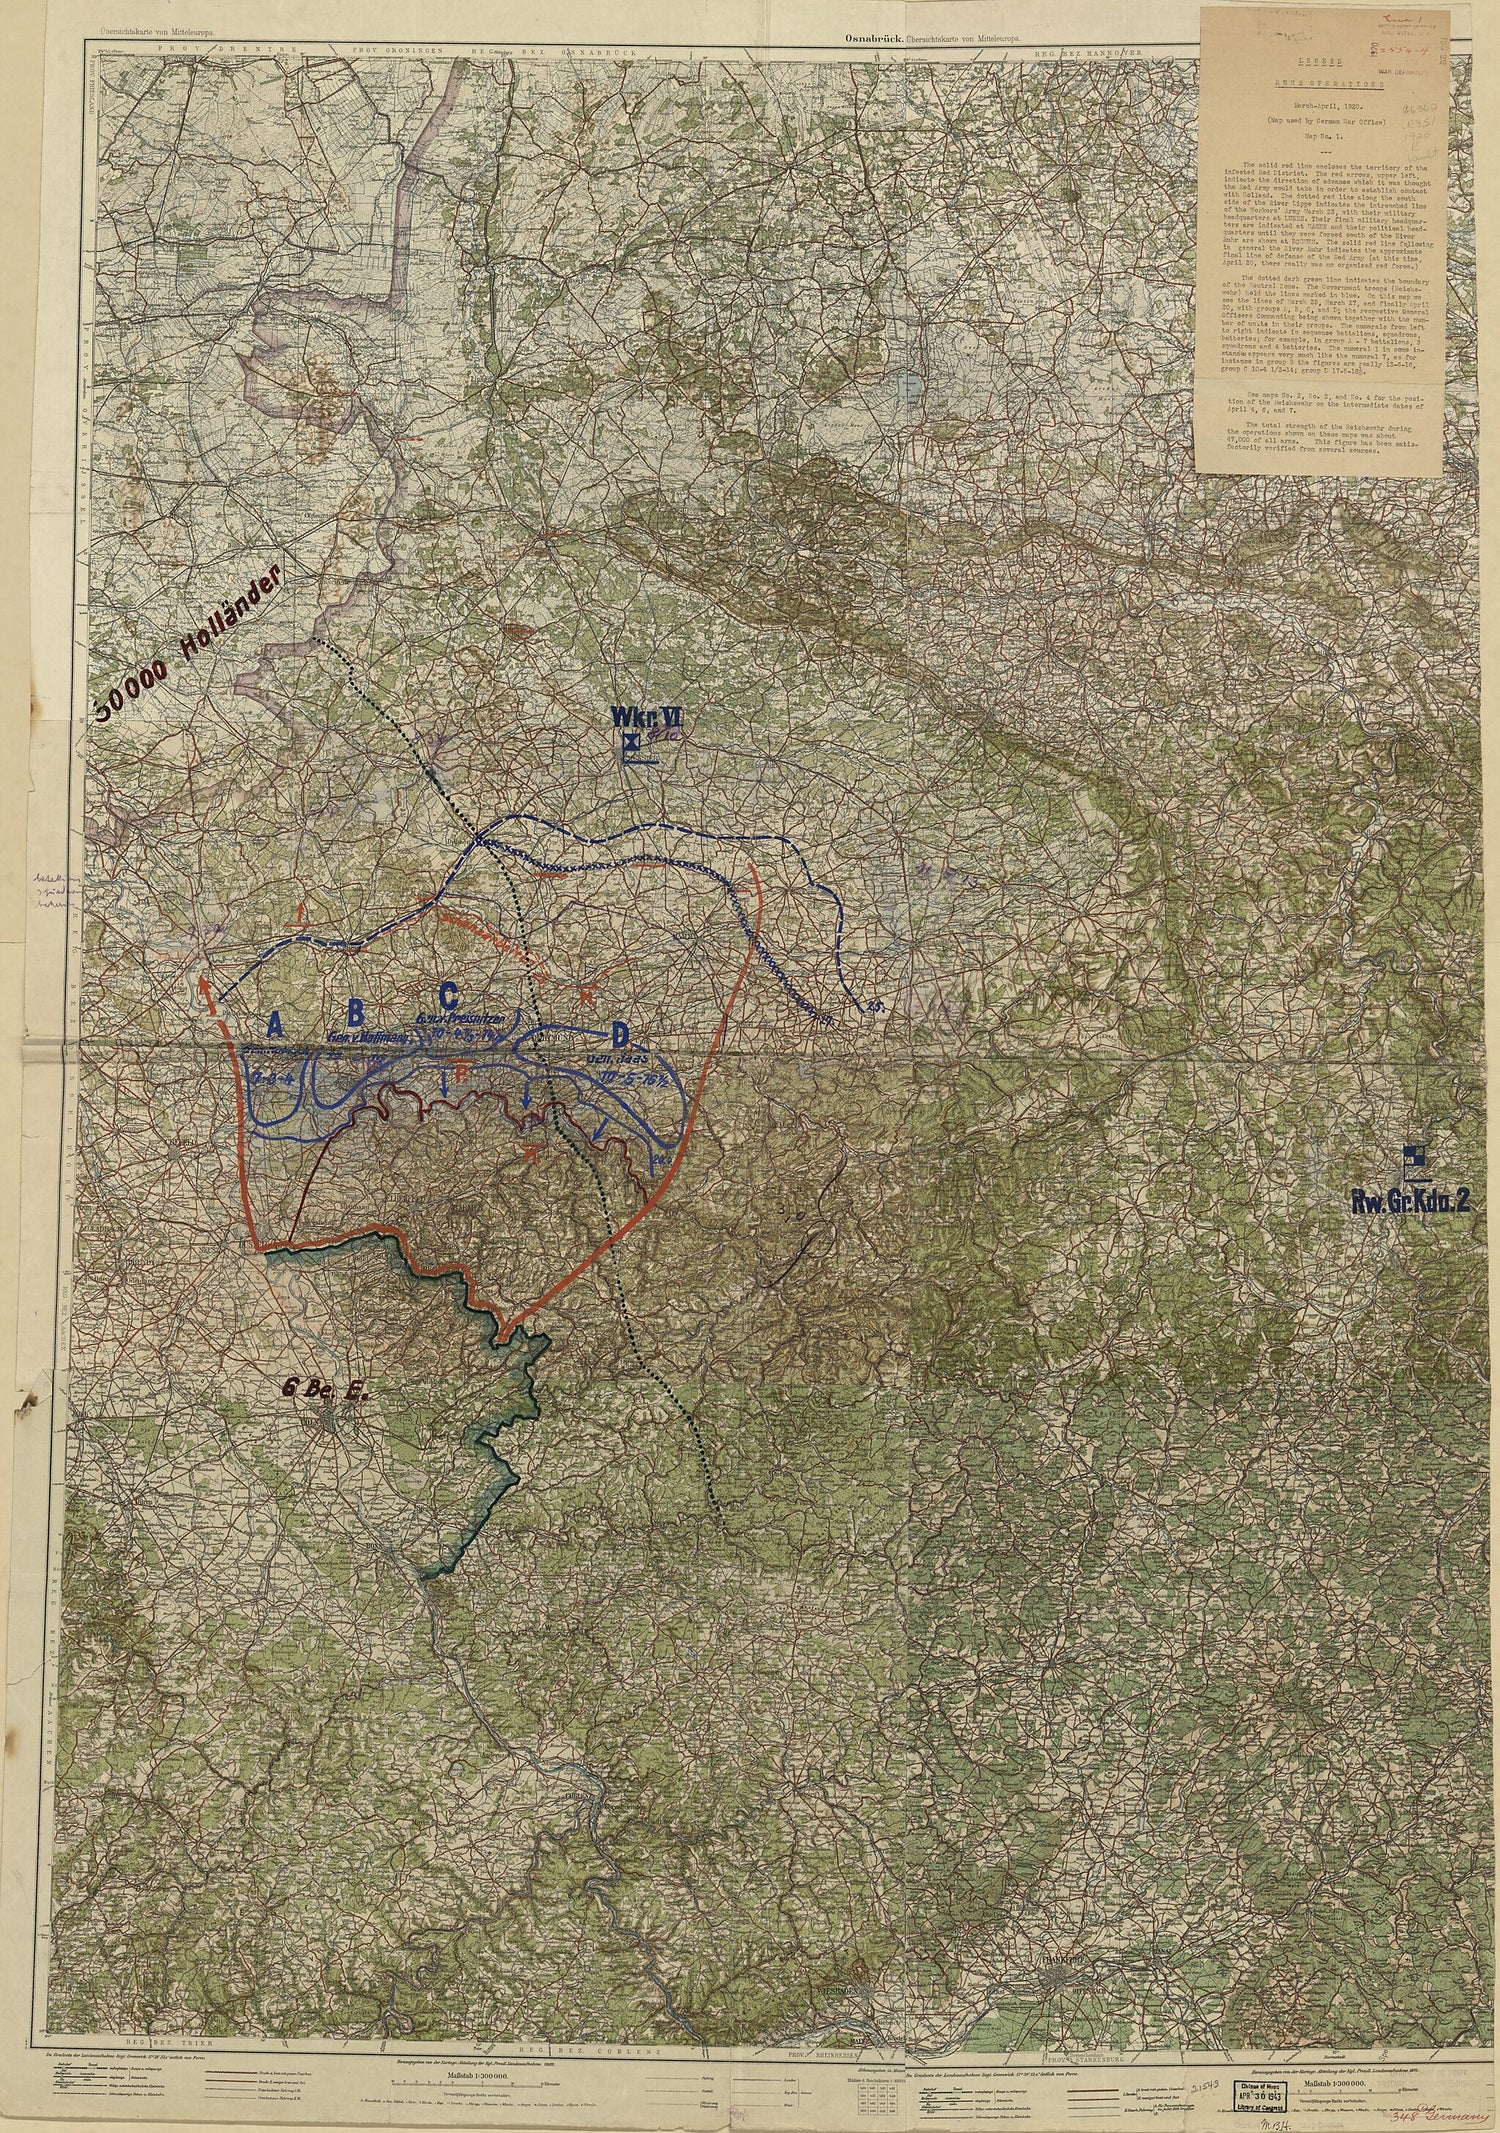 This old map of April, from 1920 was created by  Germany. Reichswehr,  United States. War Office in 1920